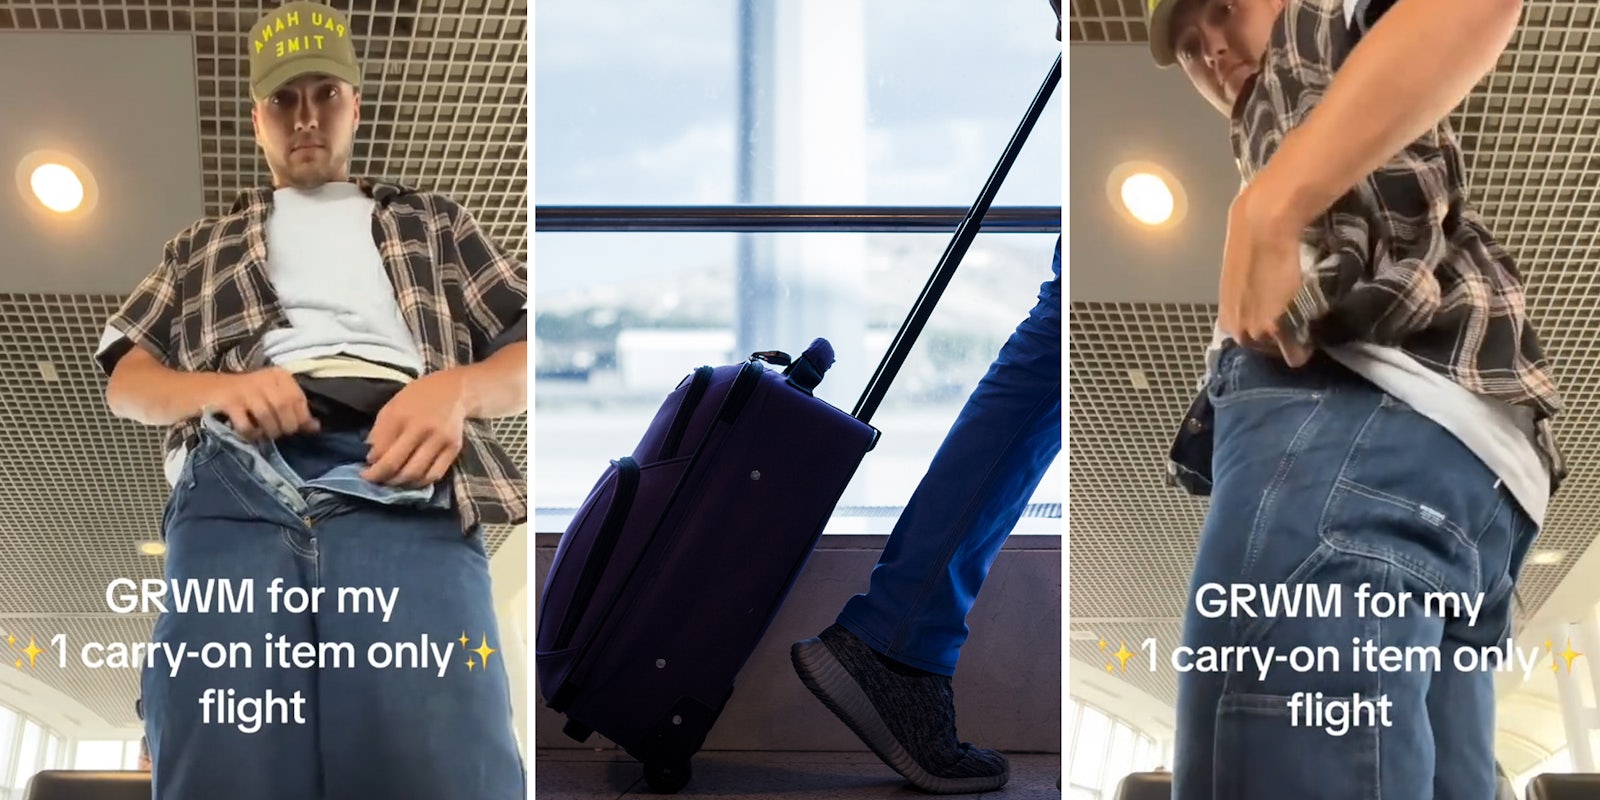 Passenger shares his trick for traveling with 1 carry-on only. There’s just one catch